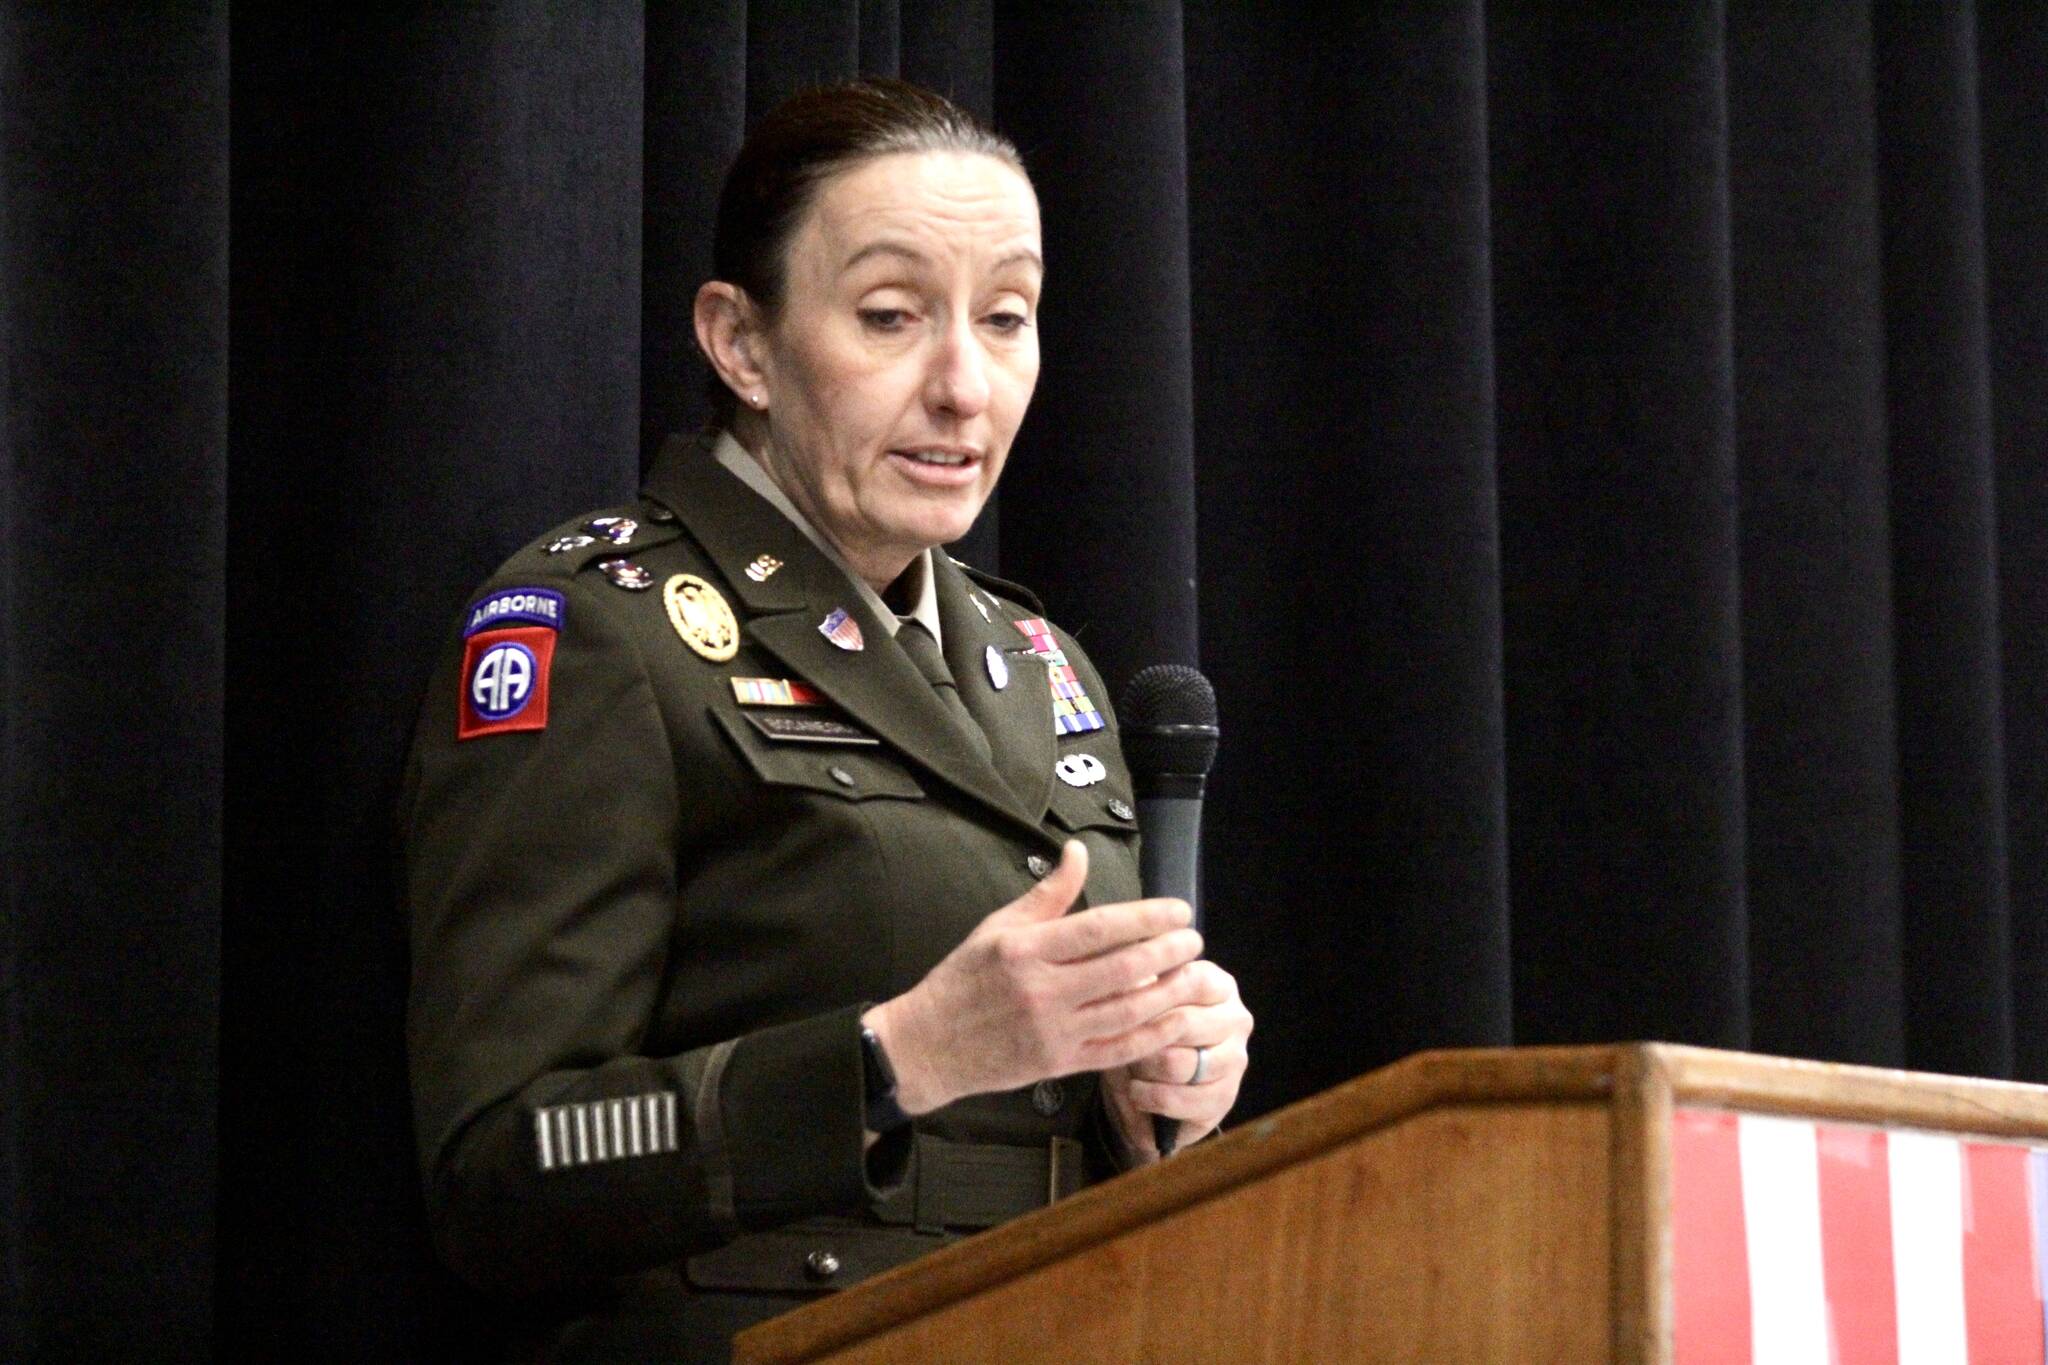 Michael S. Lockett / The Daily World
Lt. Col. Jennifer Bocanegra, an Army public affairs officer with 1st Corps, speaks during a Veterans Day ceremony at St. Mary School on Nov. 9.